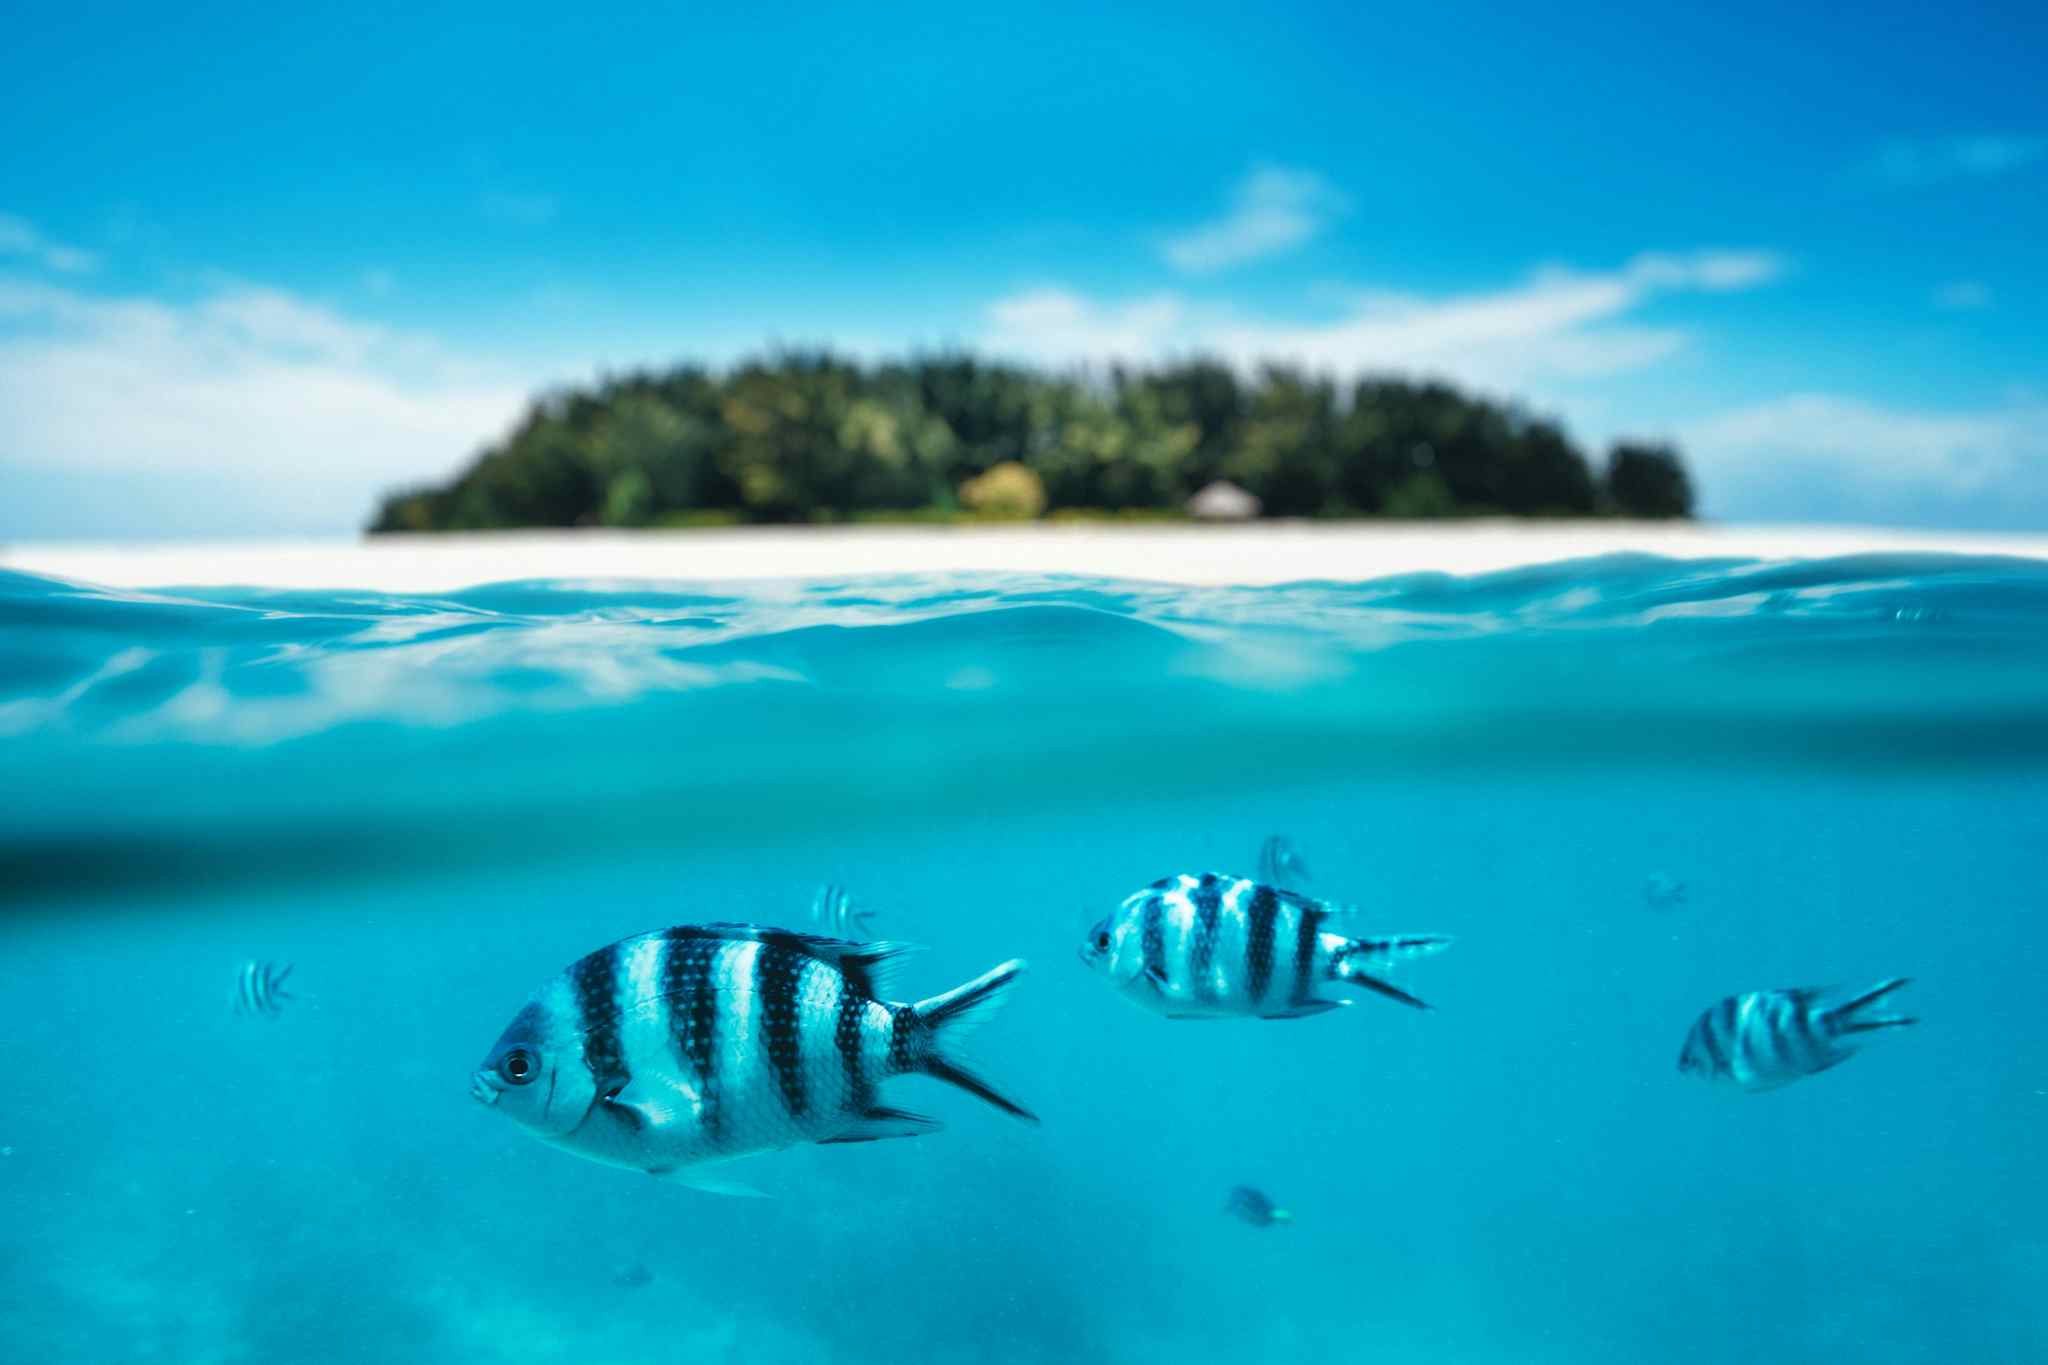 Underwater view of fish with a blurred view of Mnemba Island above the water level in the background, Tanzania.